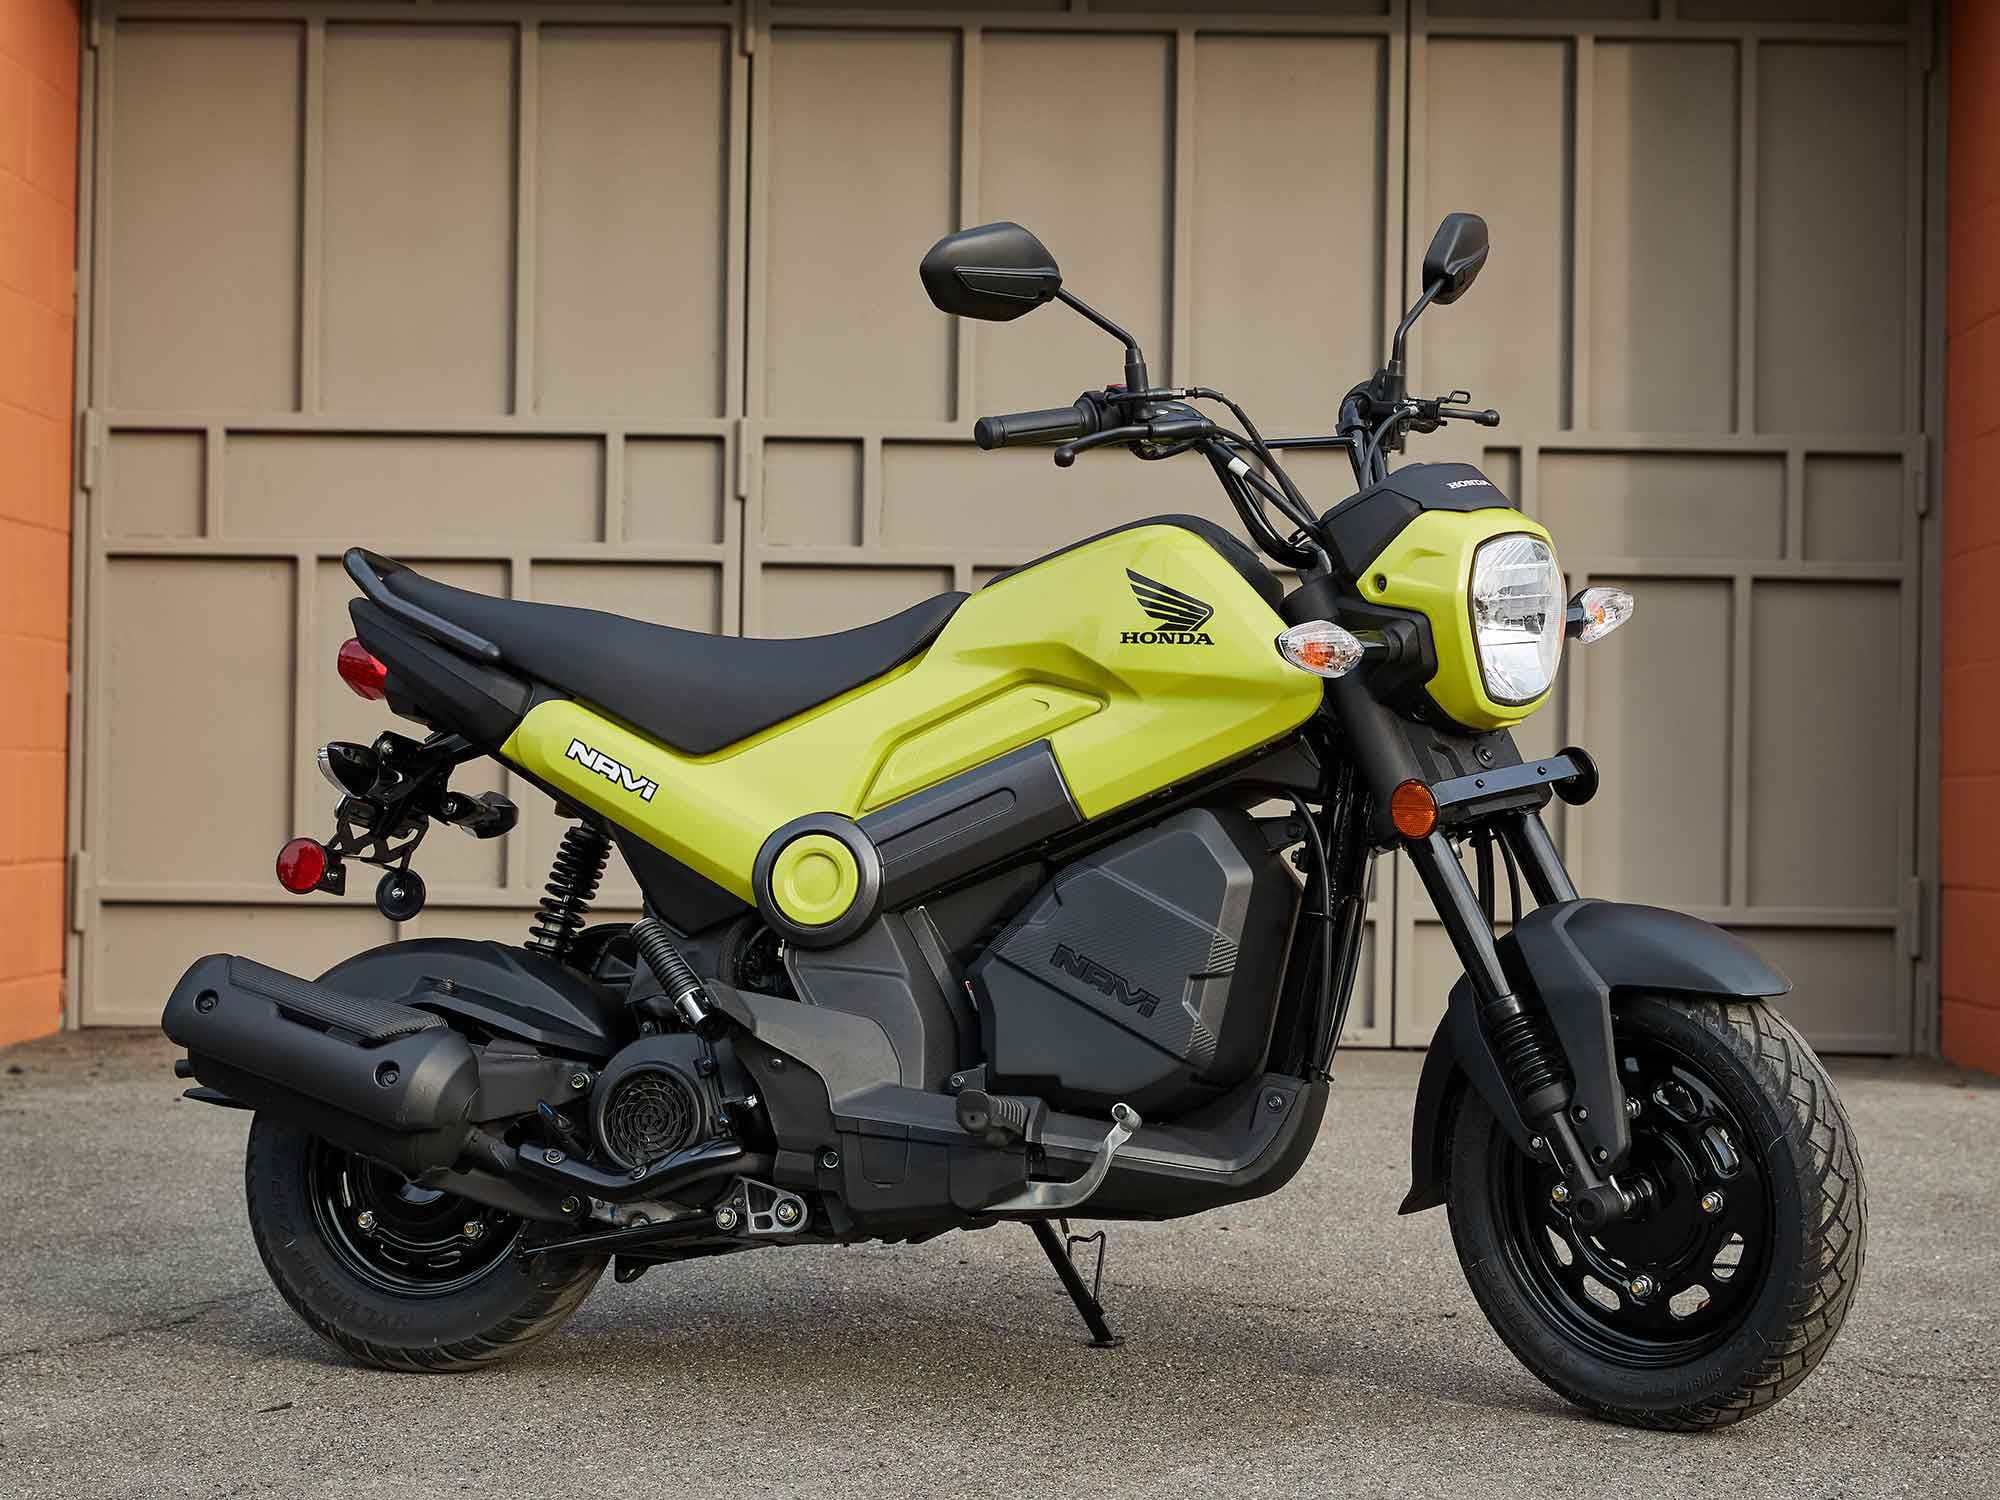 With an MSRP of $1,807, the Navi is Honda’s attempt at broadening the reach of its minimoto lineup through an affordable, fun, and new-rider-friendly package.